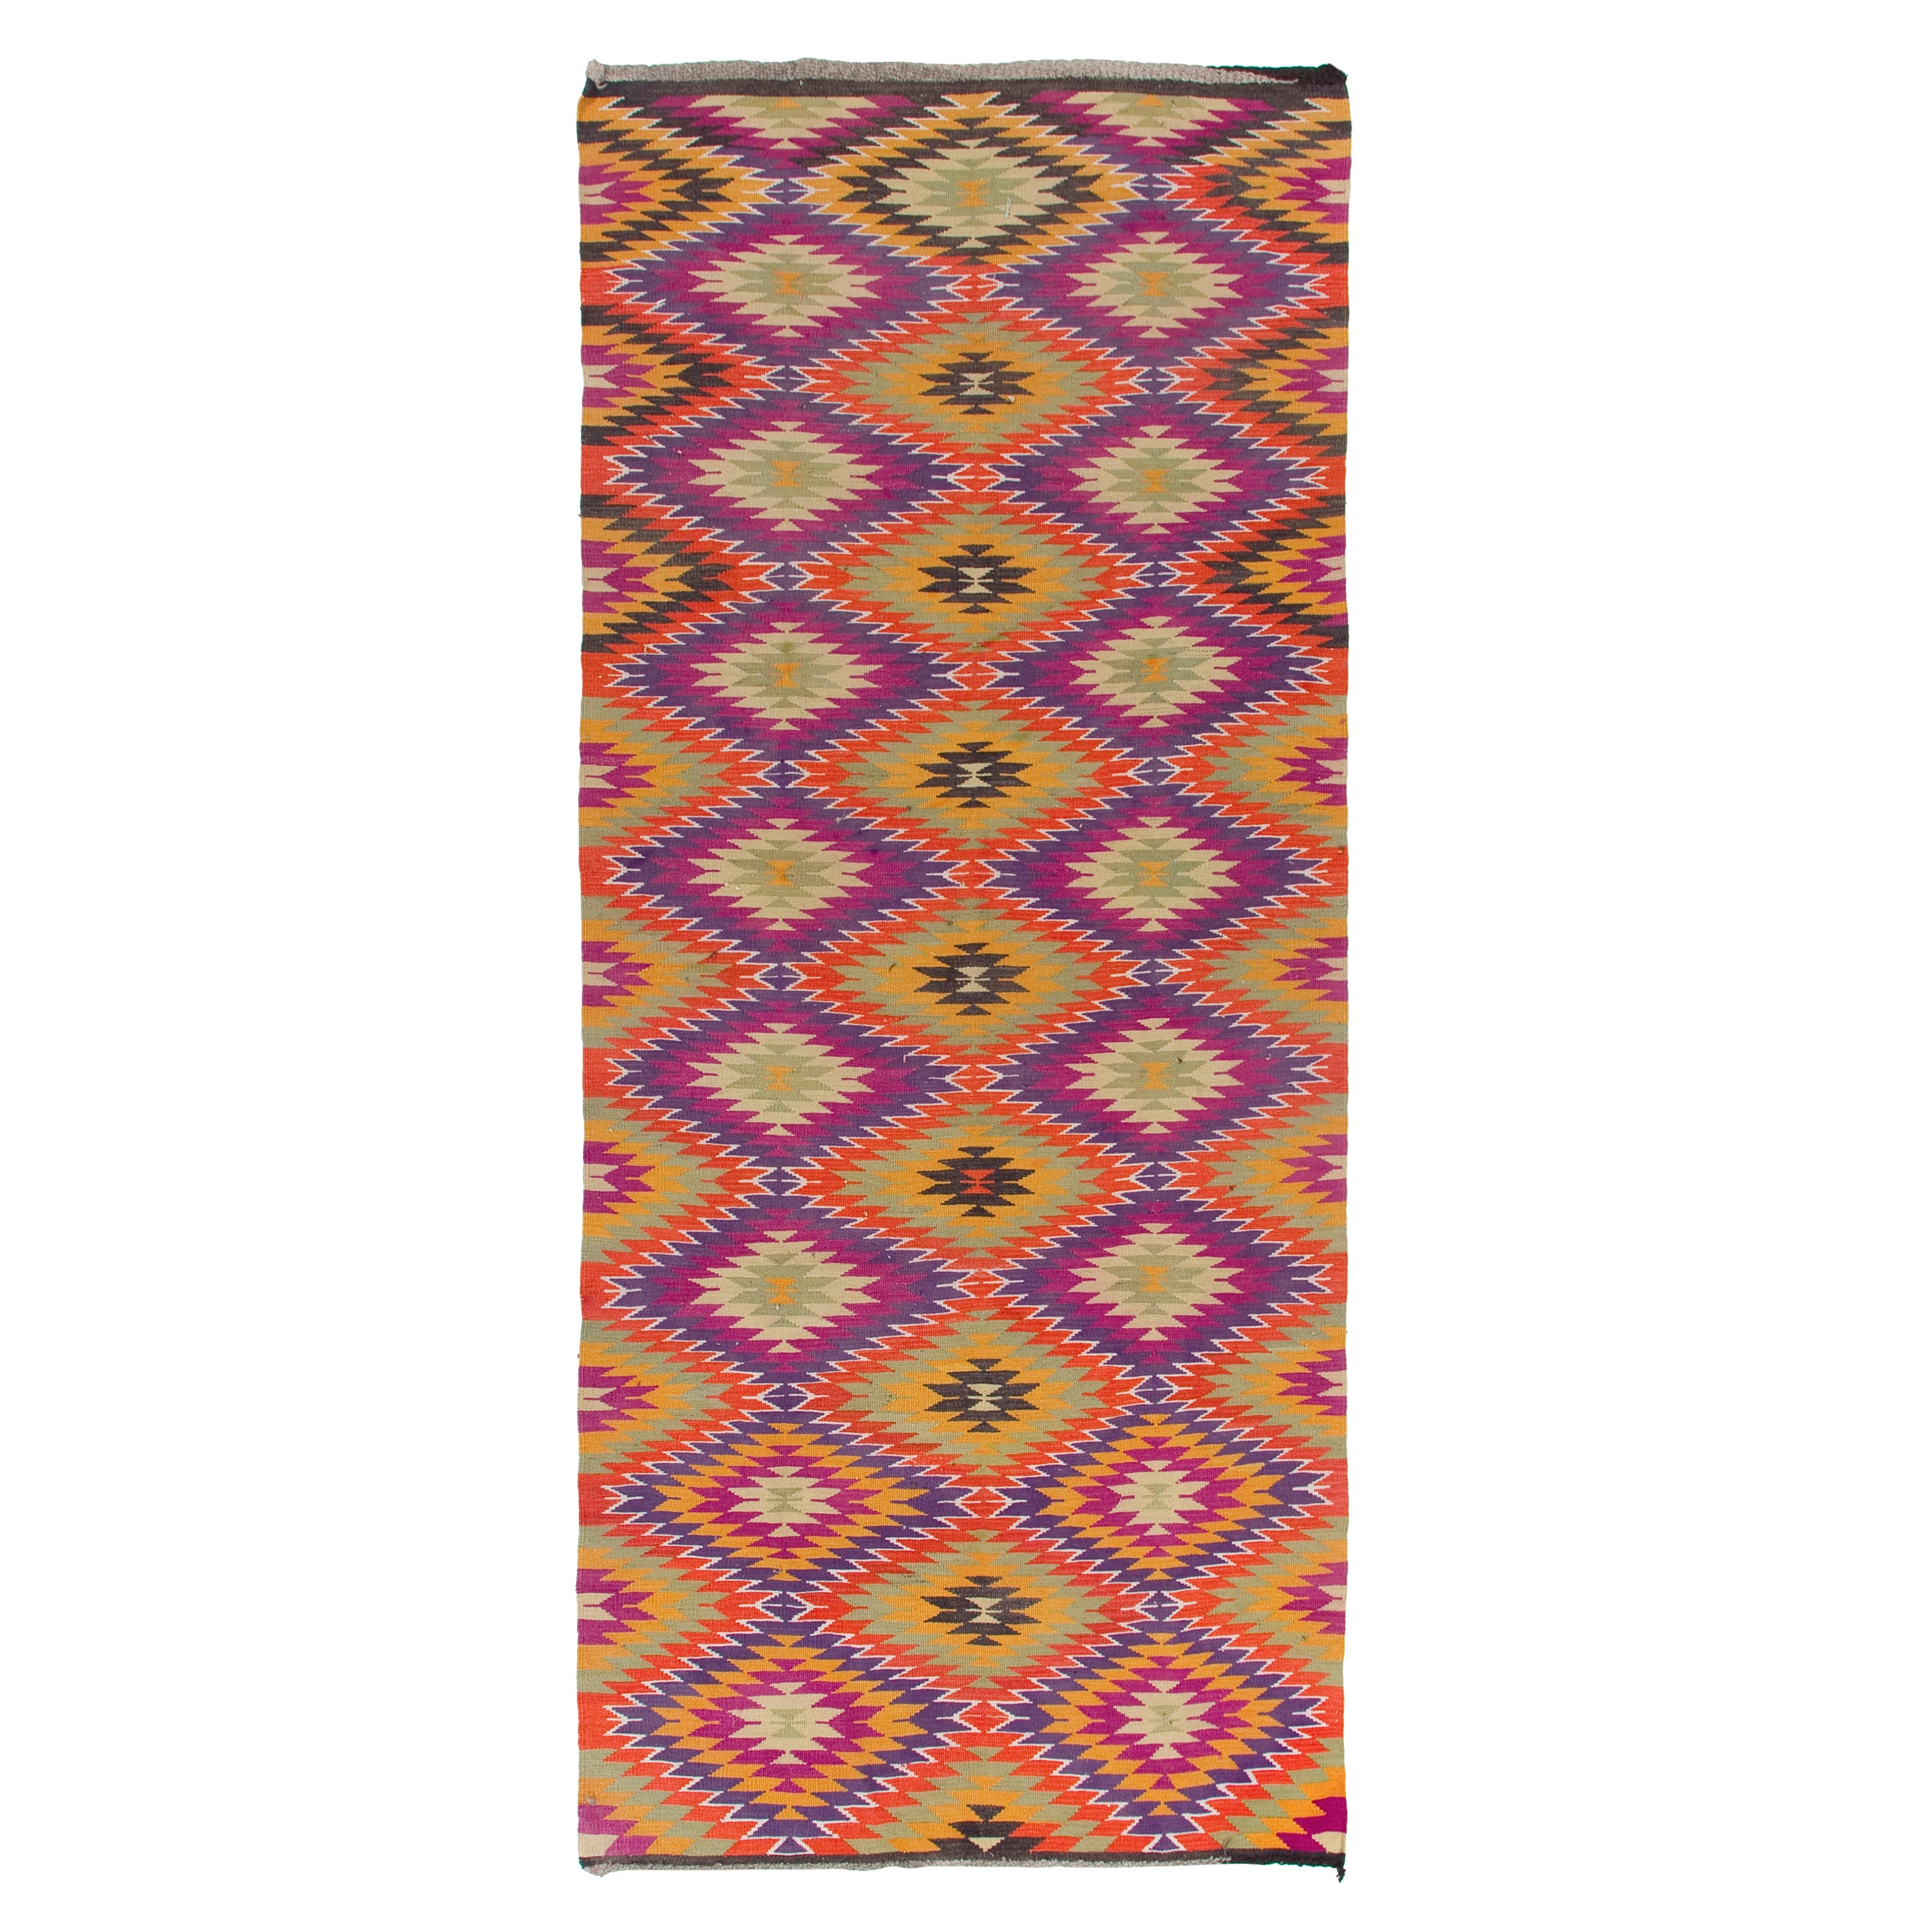 5.4x12 Ft Dazzling Handmade Kilim, Unique Flat-Weave Rug, Wool Floor Covering For Sale